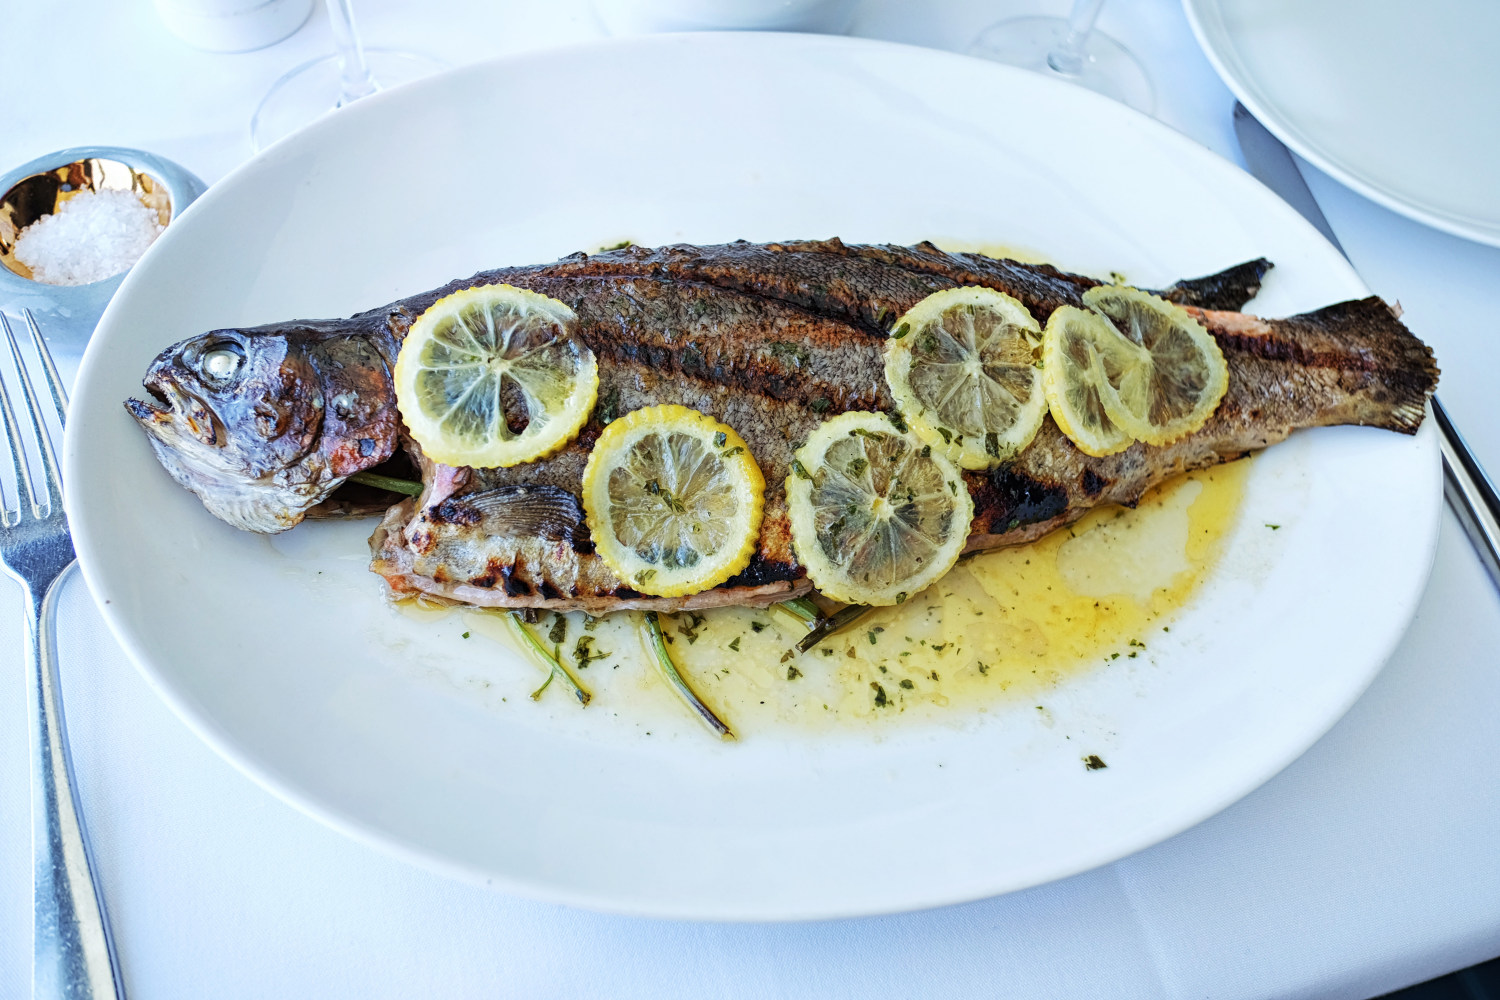 Pesce del Giorno, AKA Fish of the Day. Rainbow trout from New South Wales - Icebergs Dining Room And Bar - Bondi Beach, Sydney, Australia. Photography by Kent Johnson